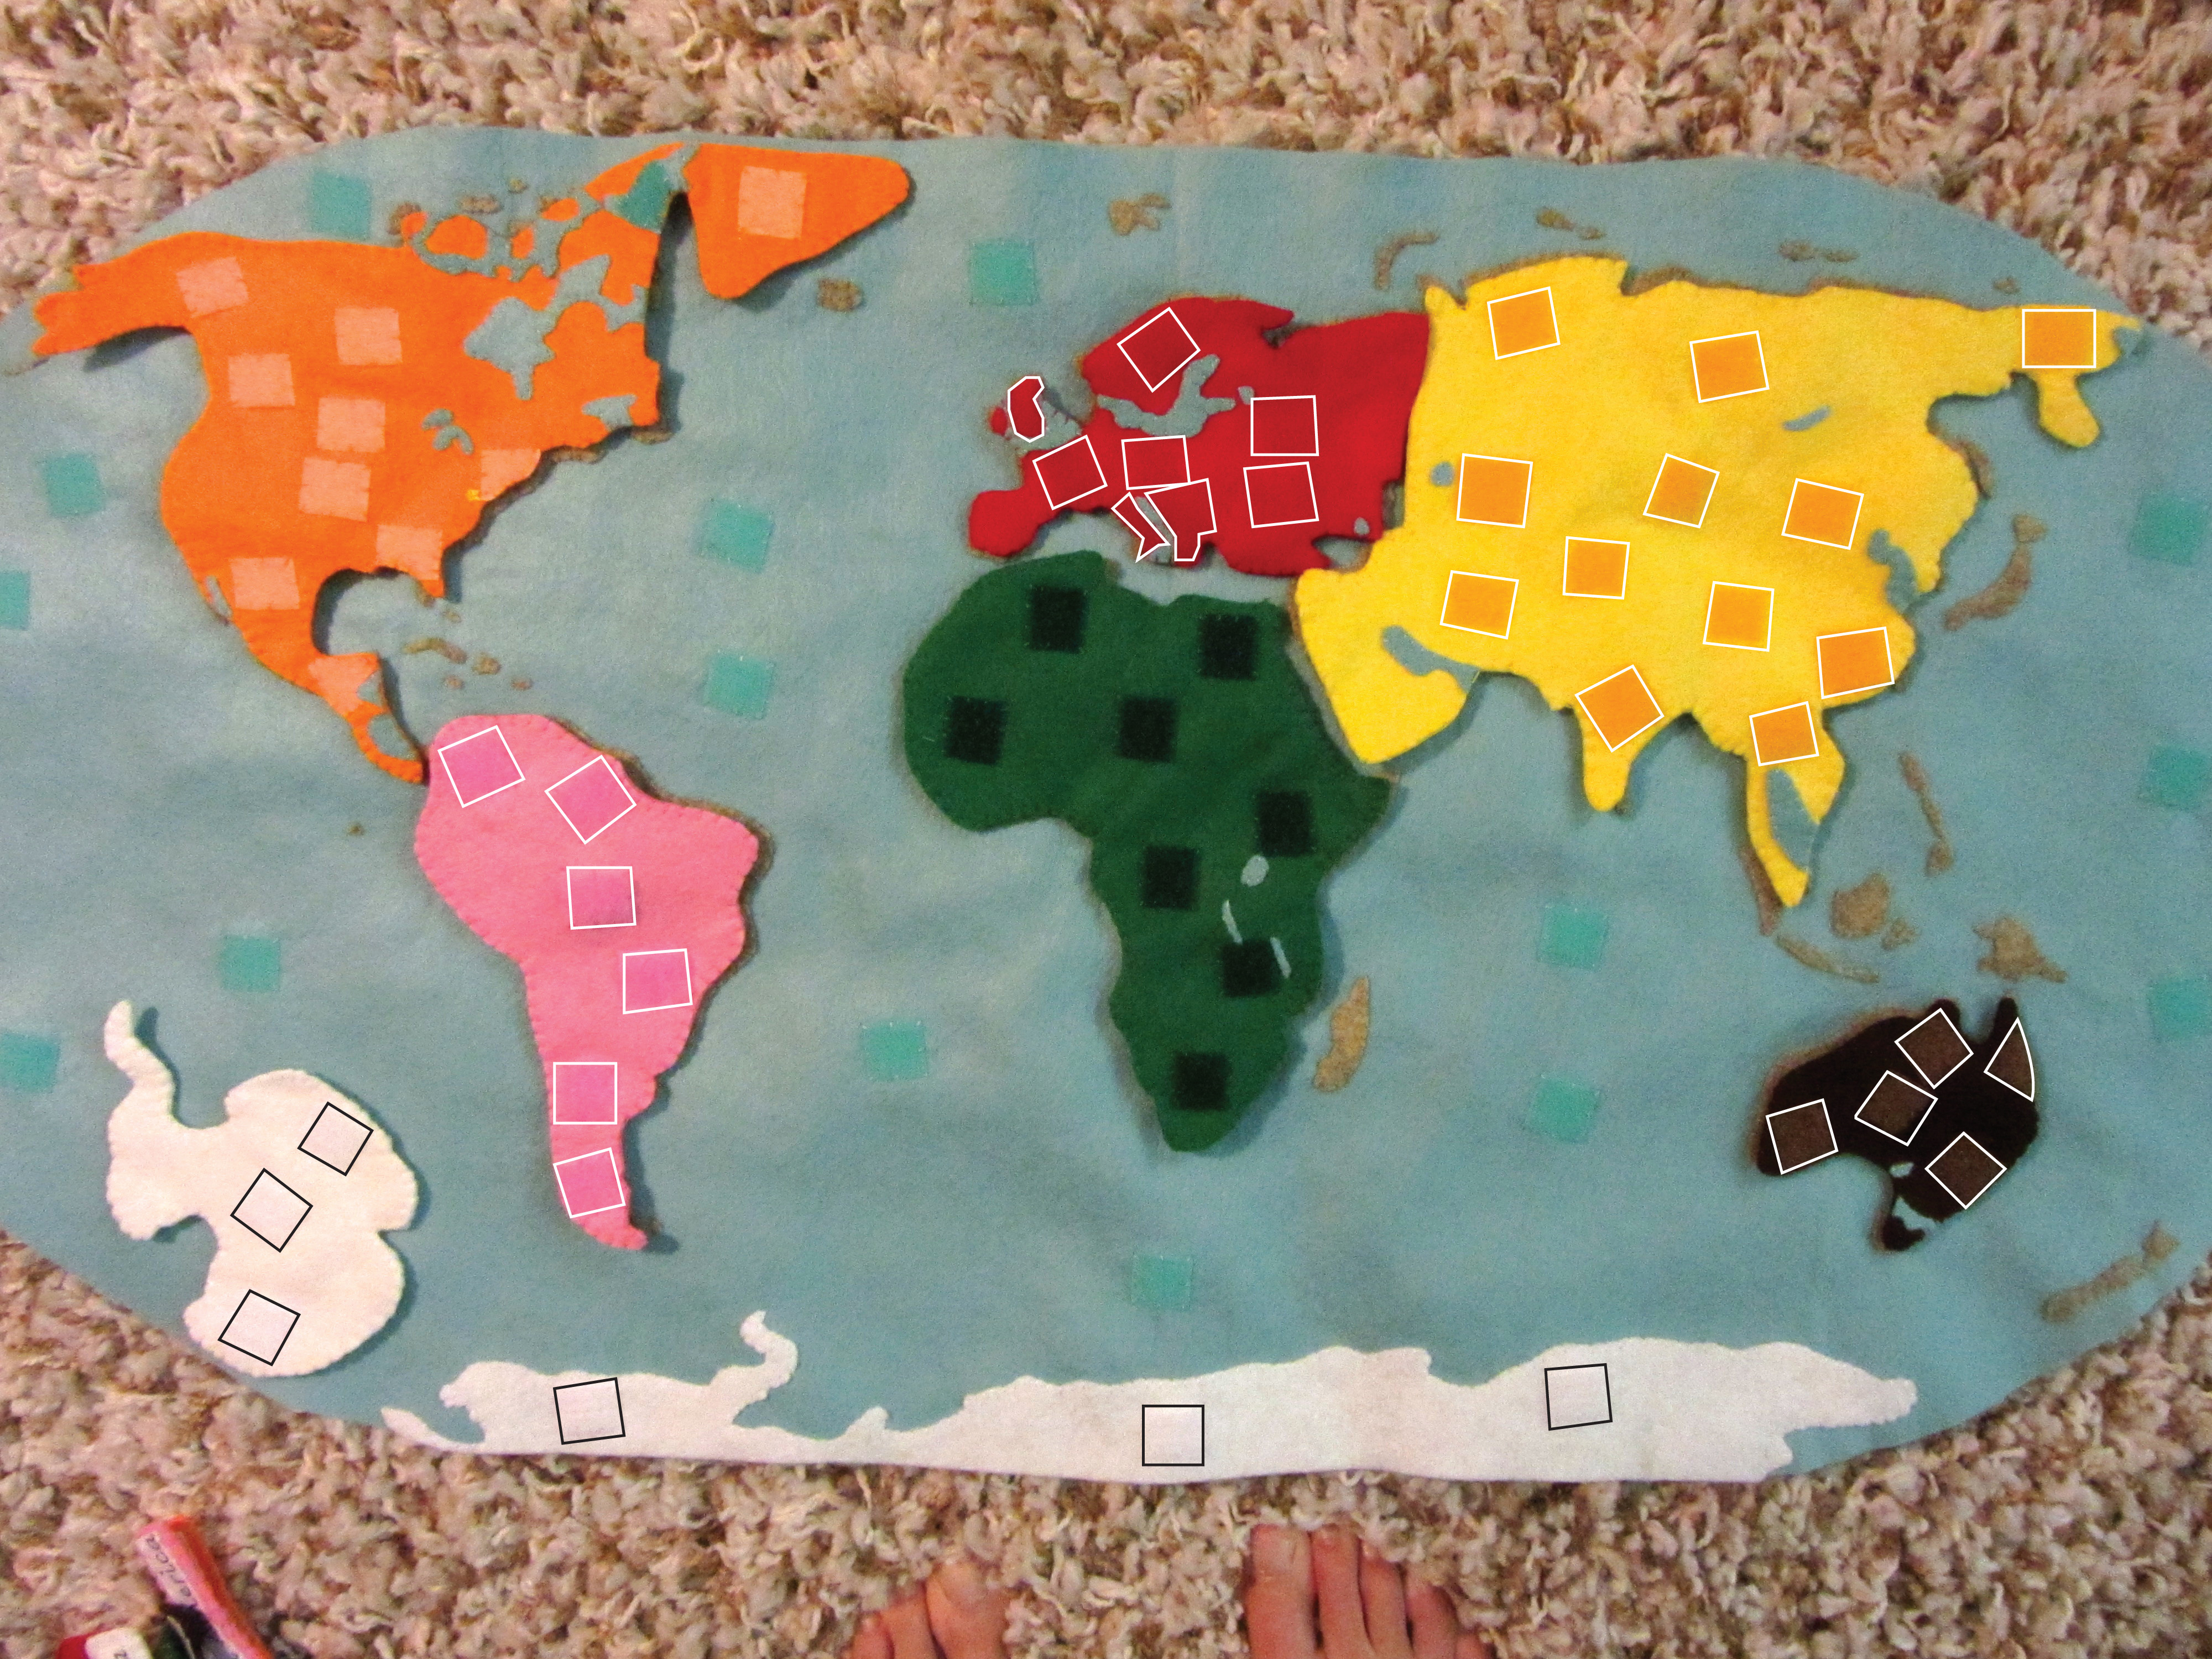 ... 3-Part with Montessori Continents Quietbook Map \u0026 Cards